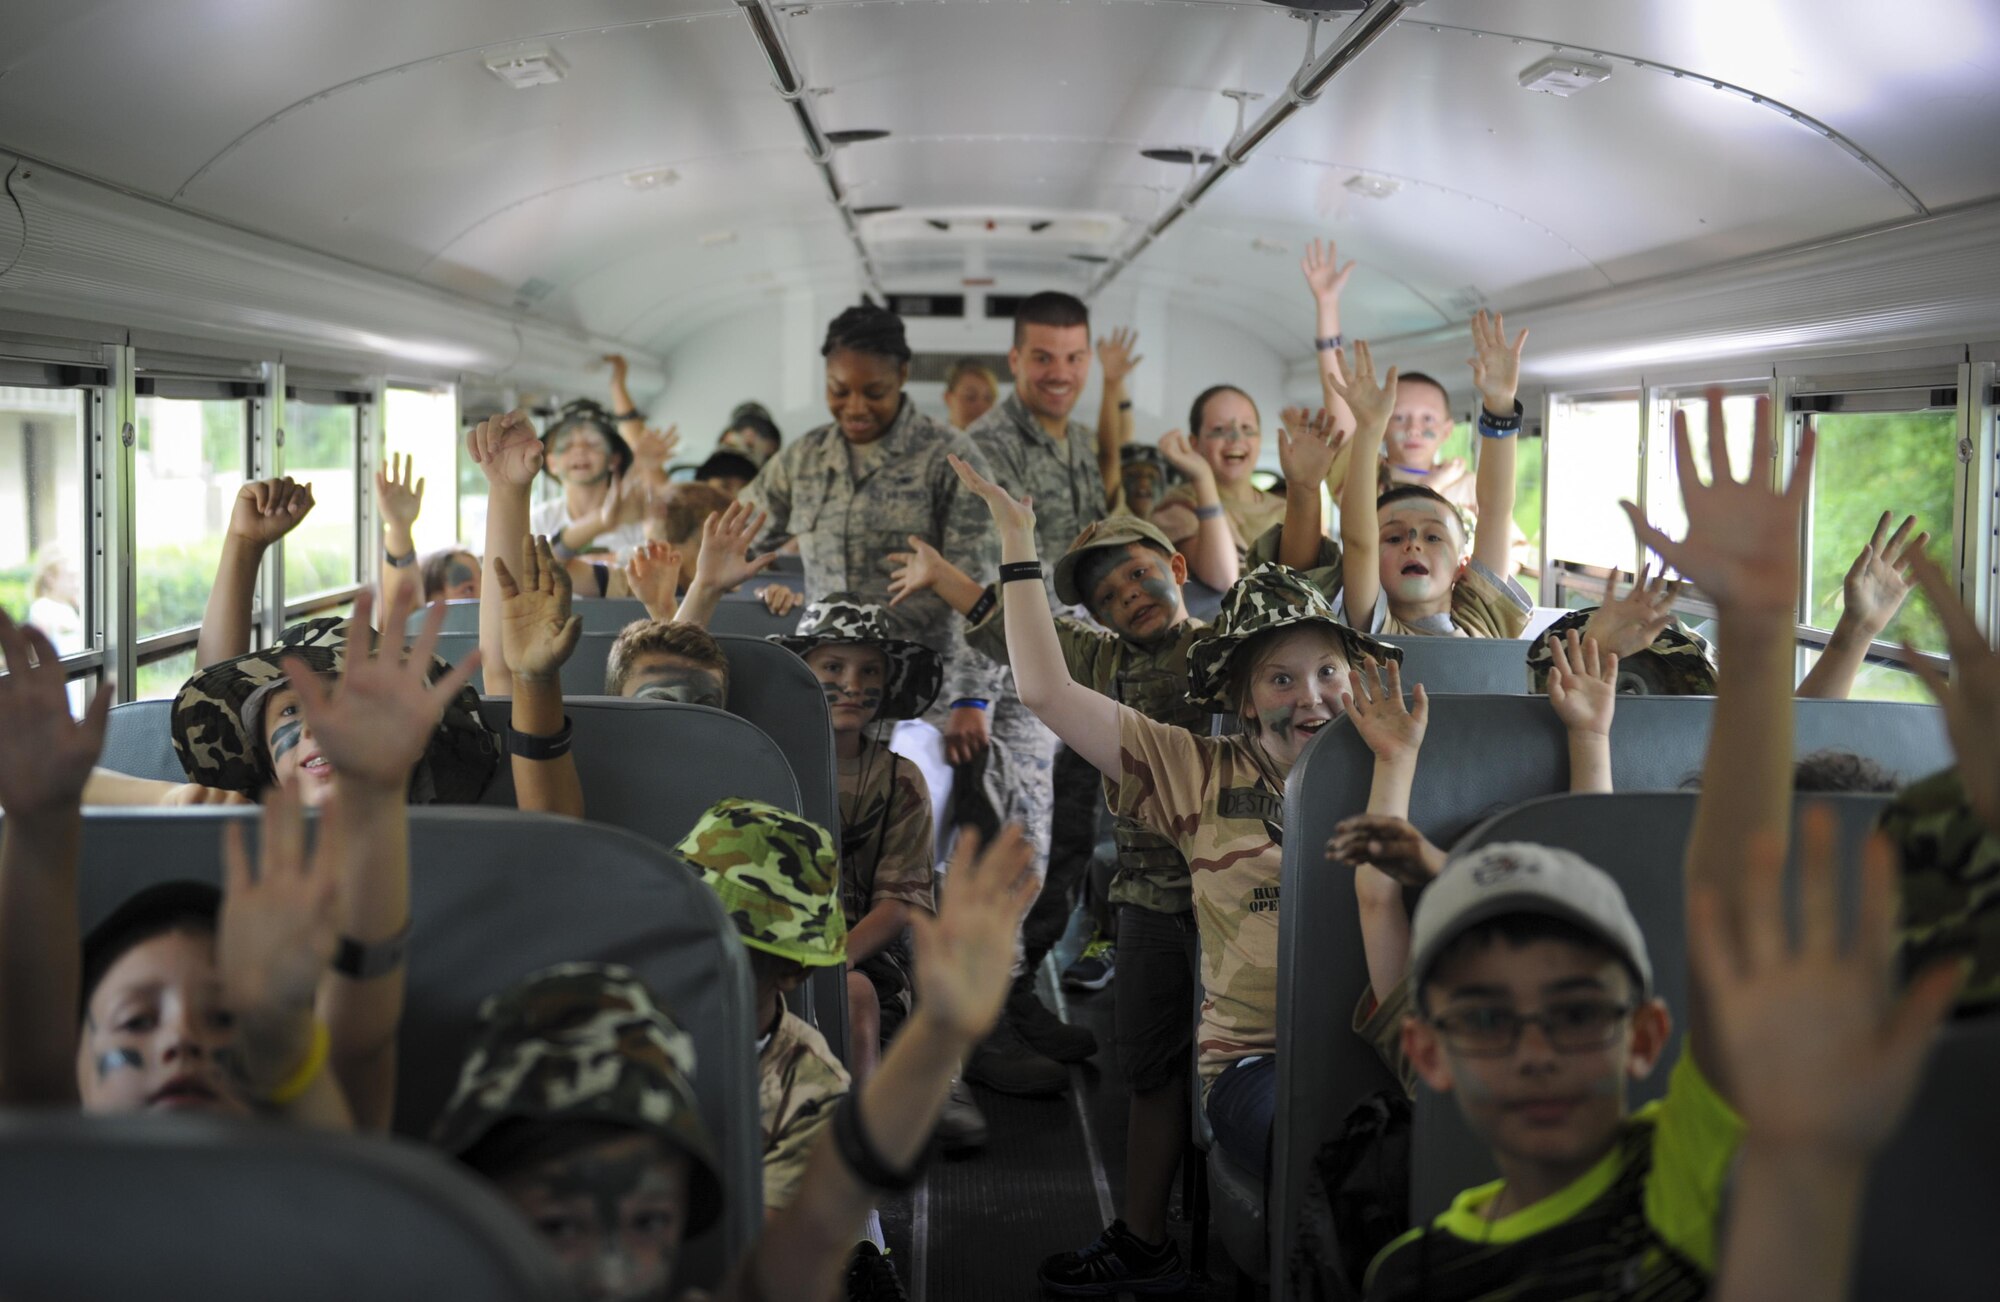 Children get ready to go to their “deployment zone” during Operation Kids Understanding Deployment Operations at Hurlburt Field, Fla., April 30, 2016. Operation KUDOS is an educational event aimed to help build resiliency in military youth by engaging them in activities that simulate the pre-deployment experience, such as pre-deployment lines and demonstrations and games held by multiple squadrons around Hurlburt. The event concluded with a “homecoming” where parents welcomed back their children. (U.S. Air Force photo by Senior Airman Meagan Schutter)